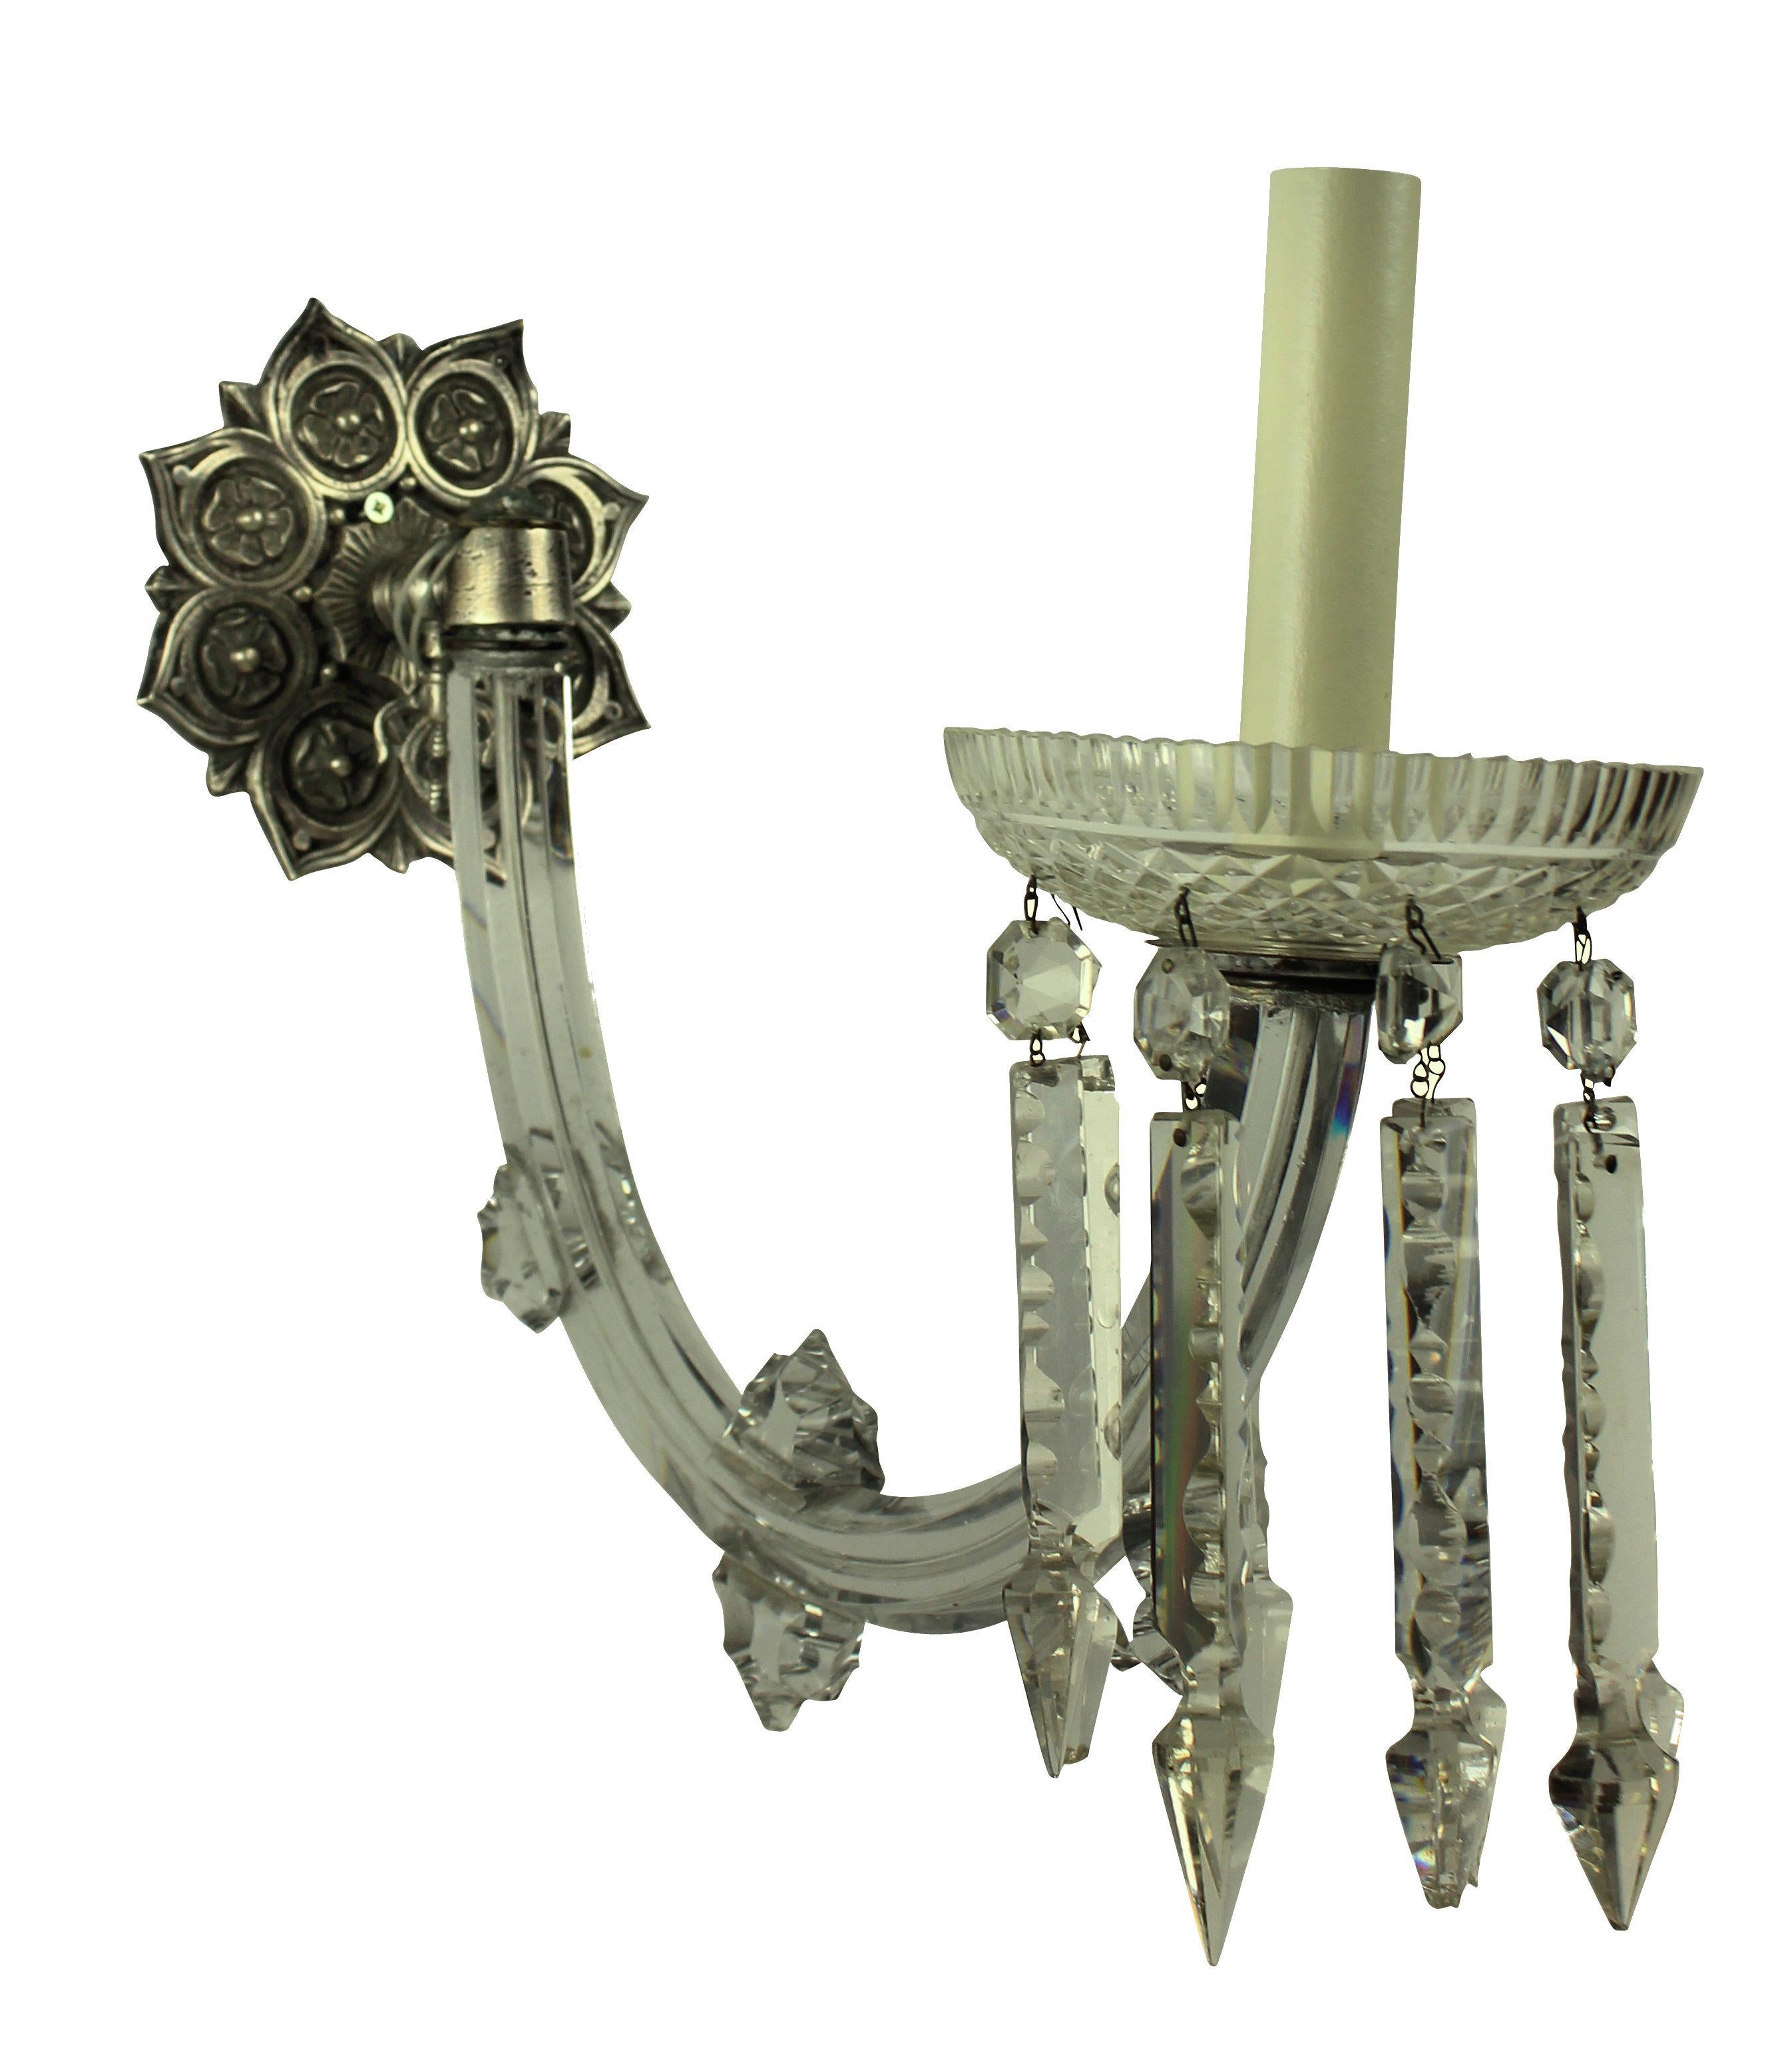 A pair of good quality English single arm sconces, with large up-swept handcut-glass arms with decorative glass finials and a finely cut dish with pendants. The metal work of silvered bronze.